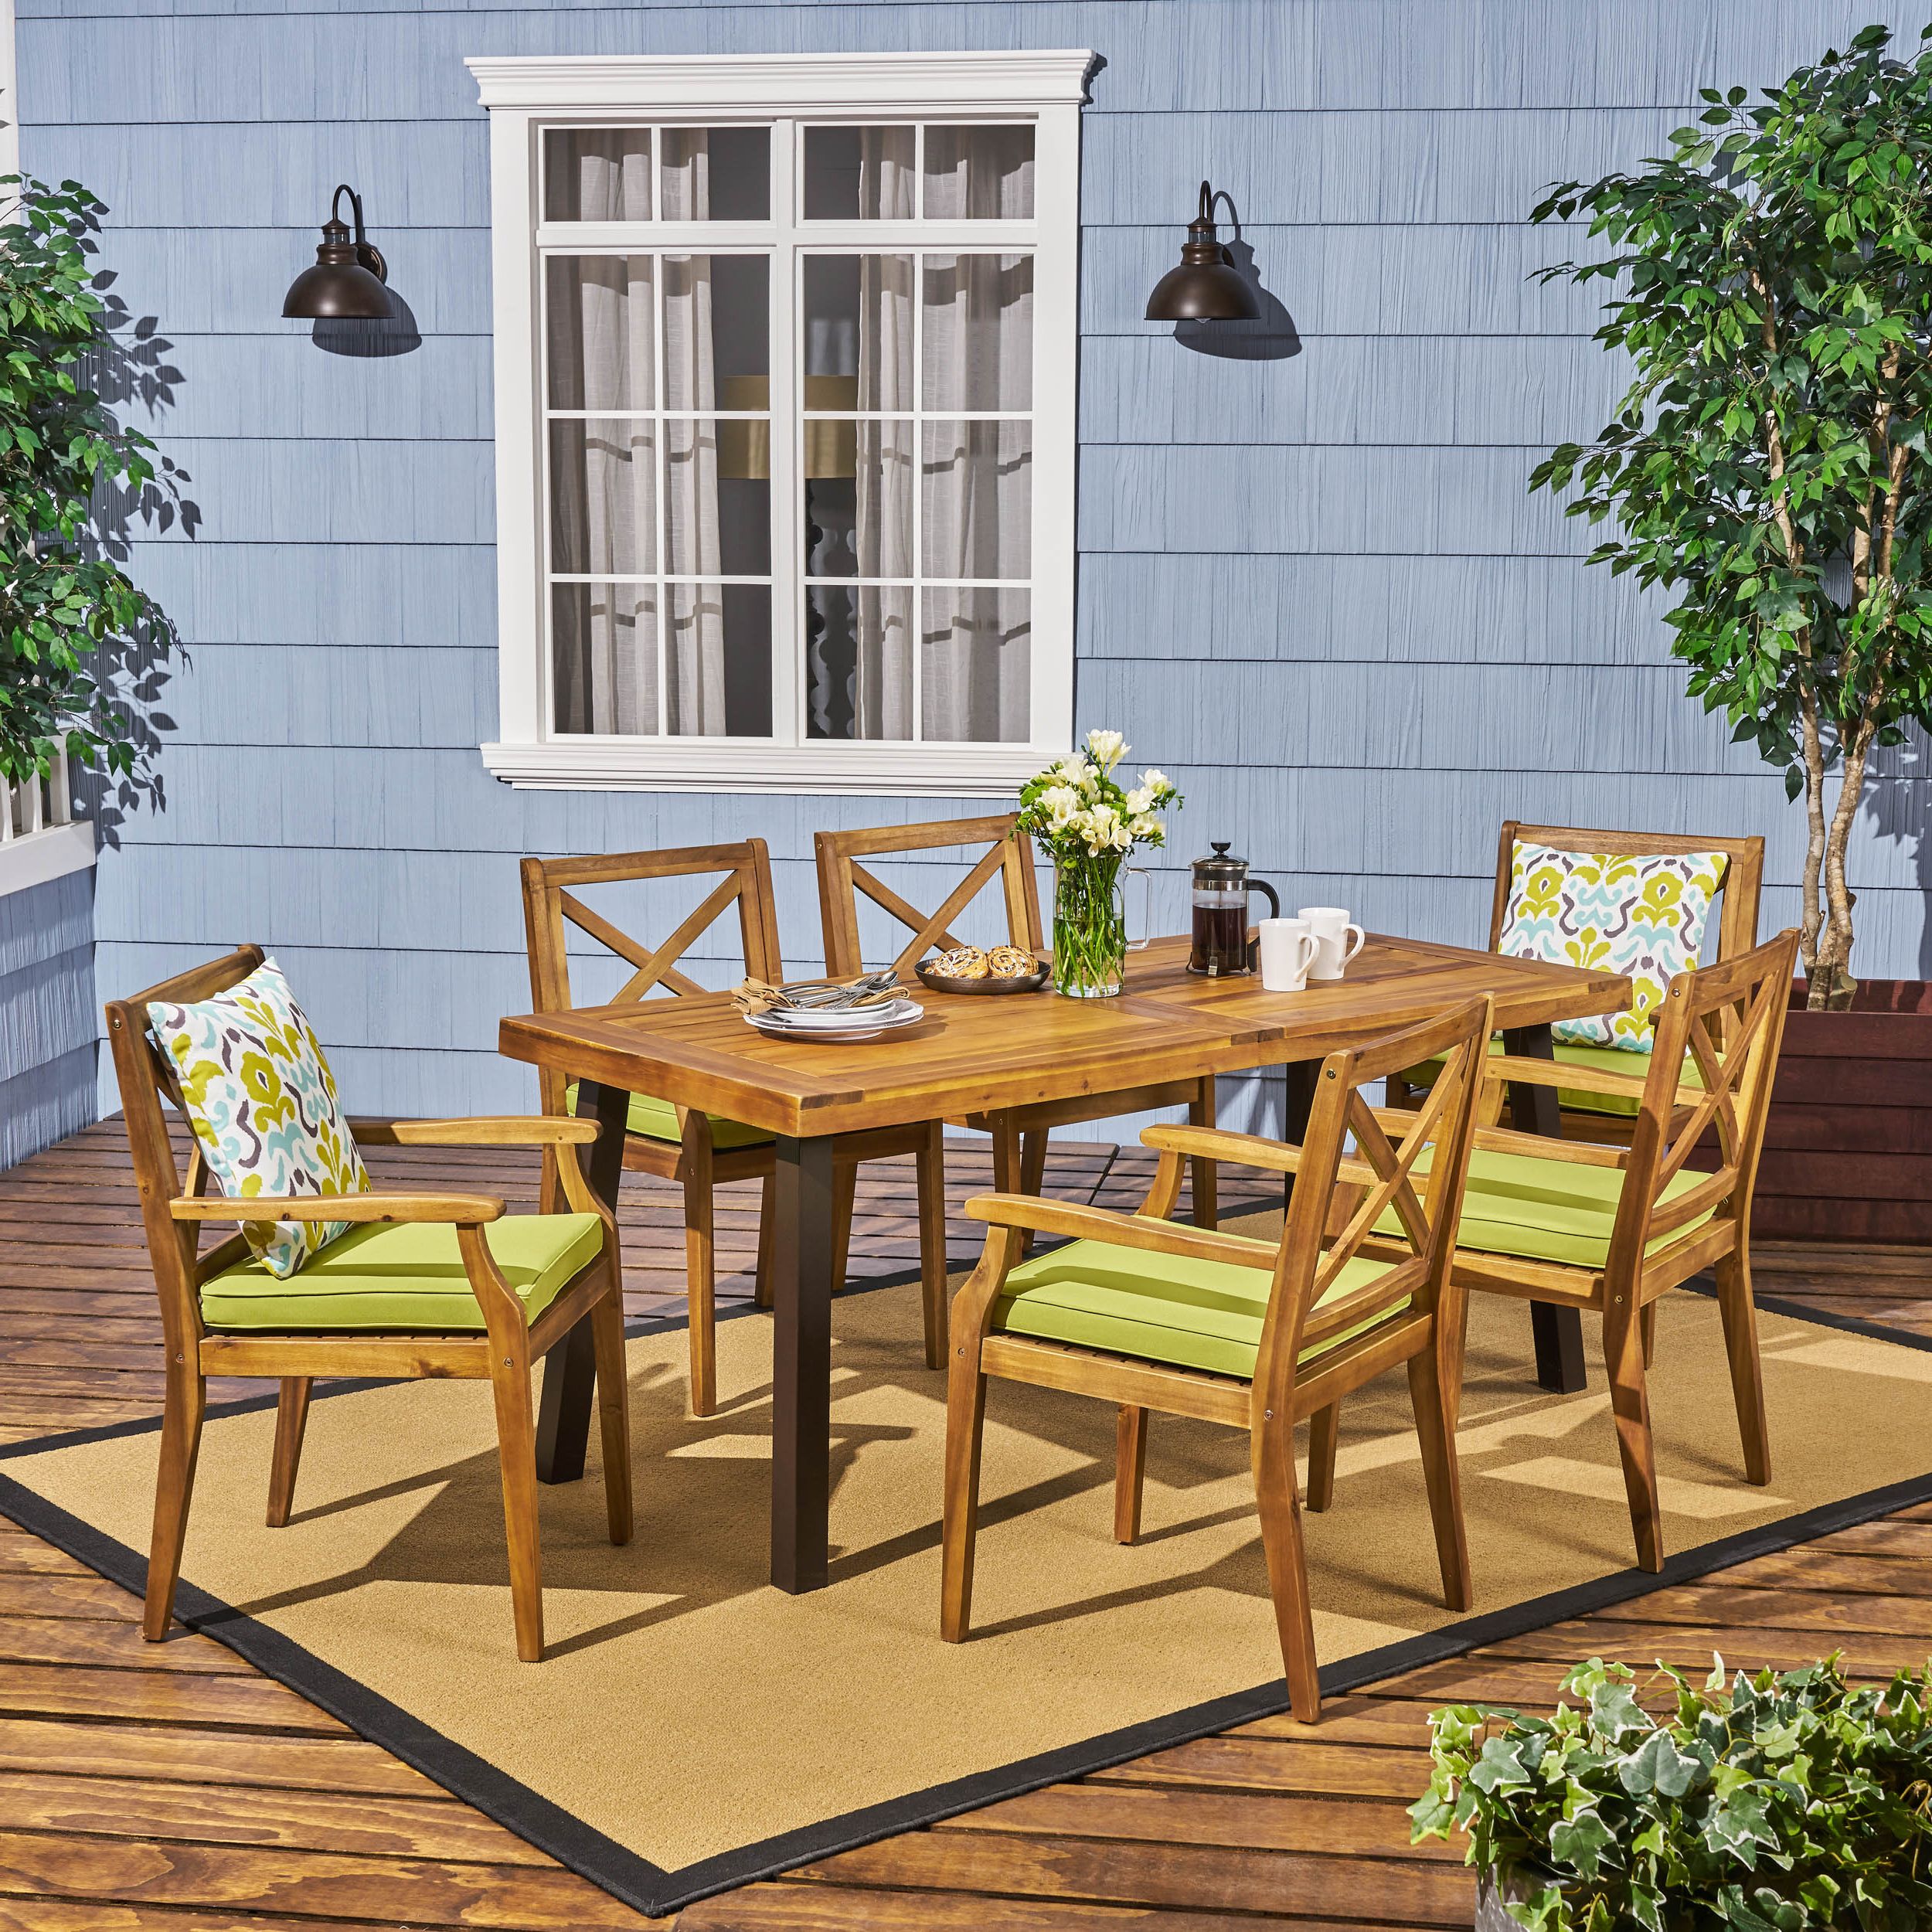 Best And Newest Acacia Wood Outdoor Seating Patio Sets Regarding Corey Outdoor 7 Piece Acacia Wood Dining Set With Table, Teak, Rustic (View 3 of 15)